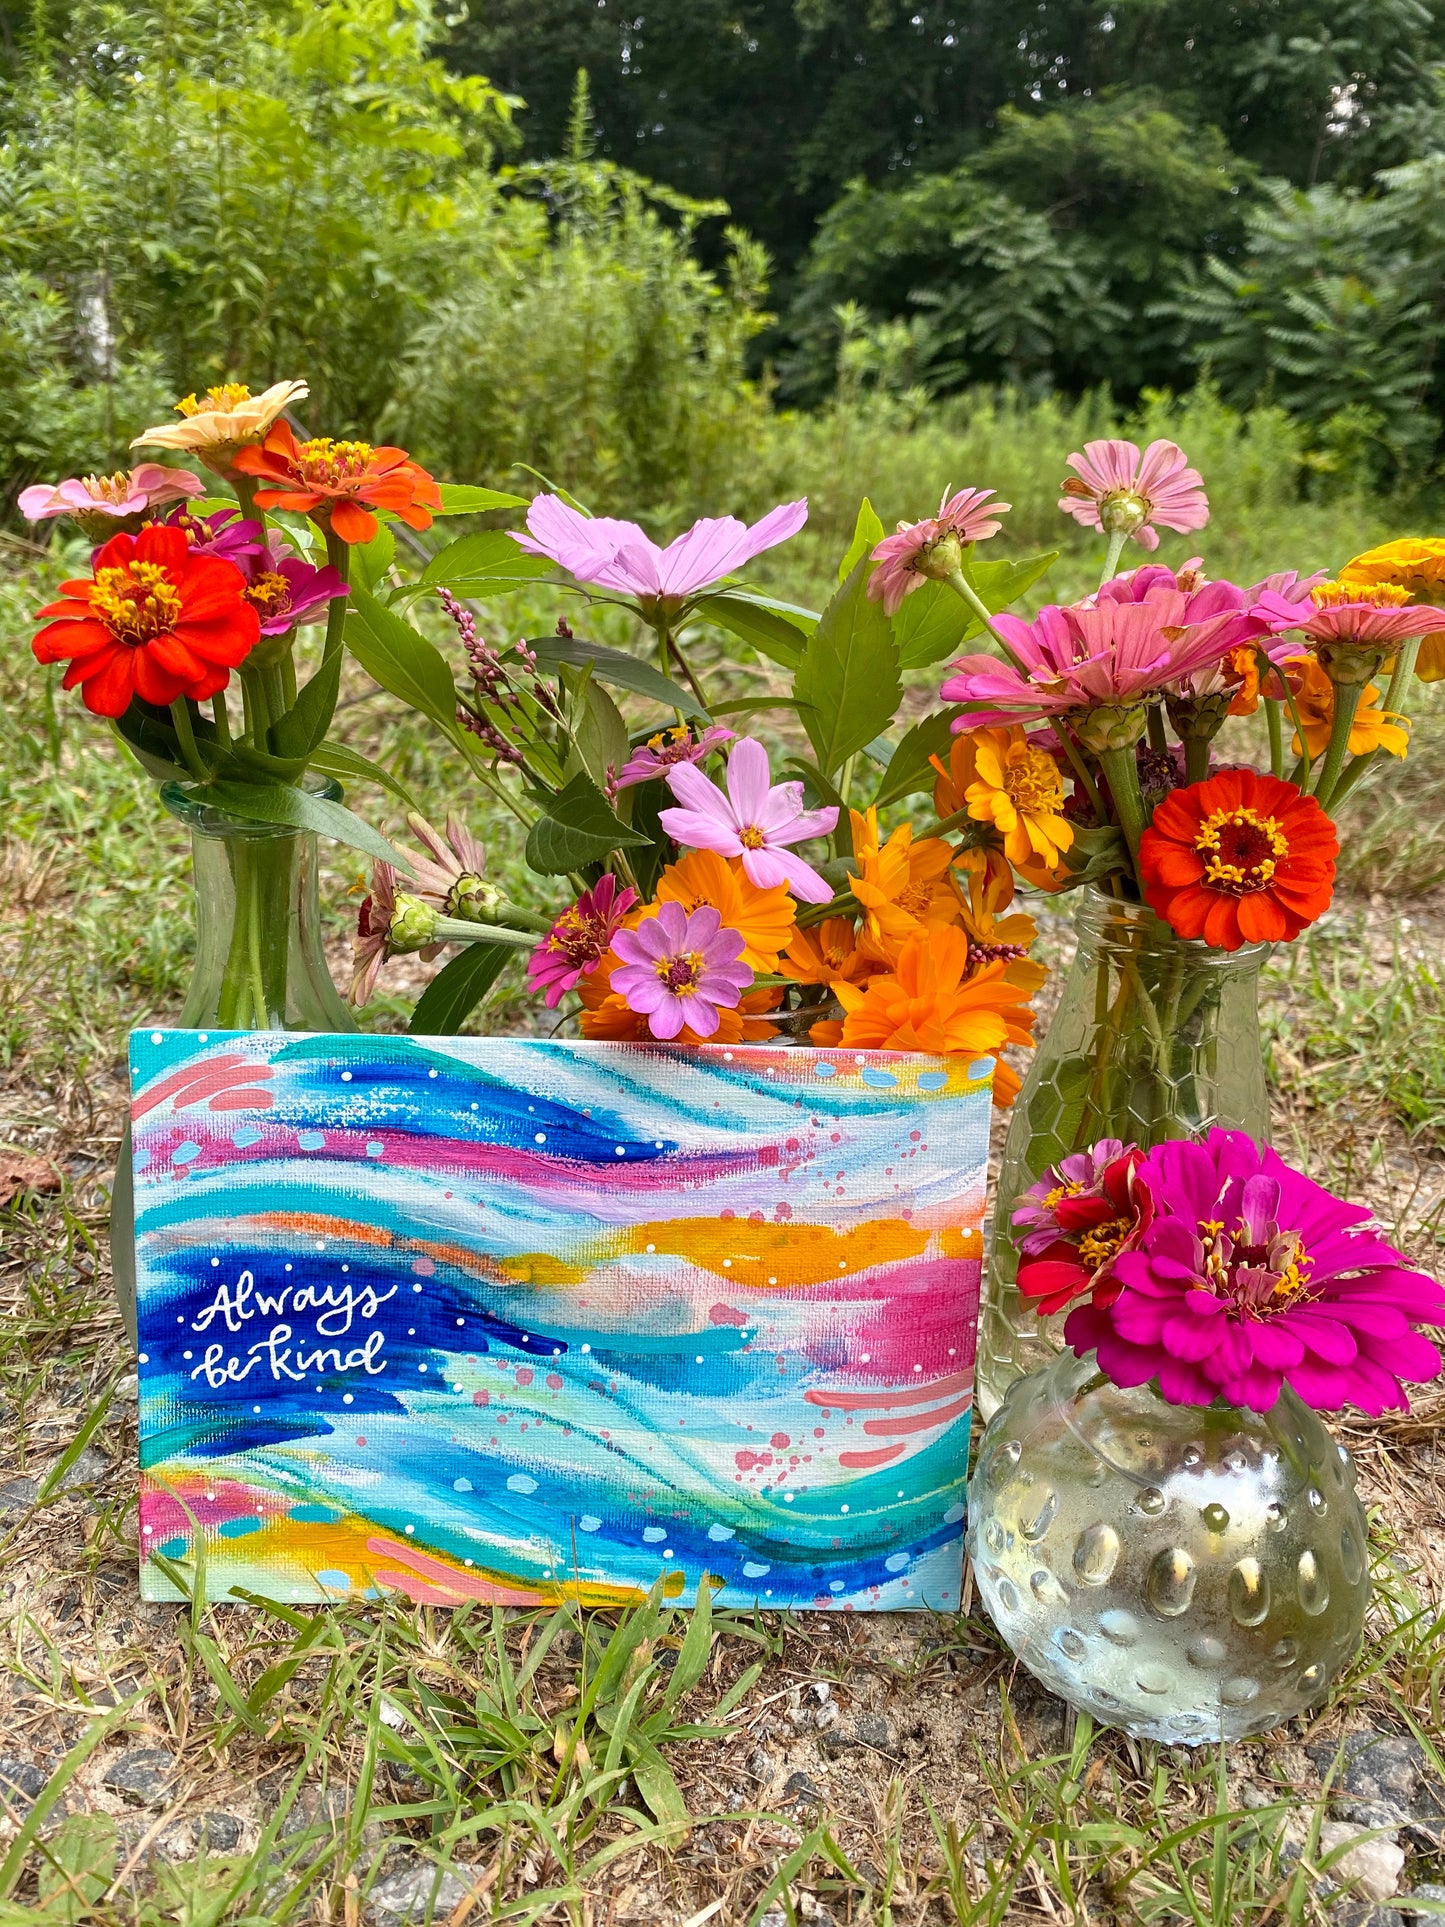 August 2020 Daily Painting Day 2 “Colors of Kindness” 5x7 inch original